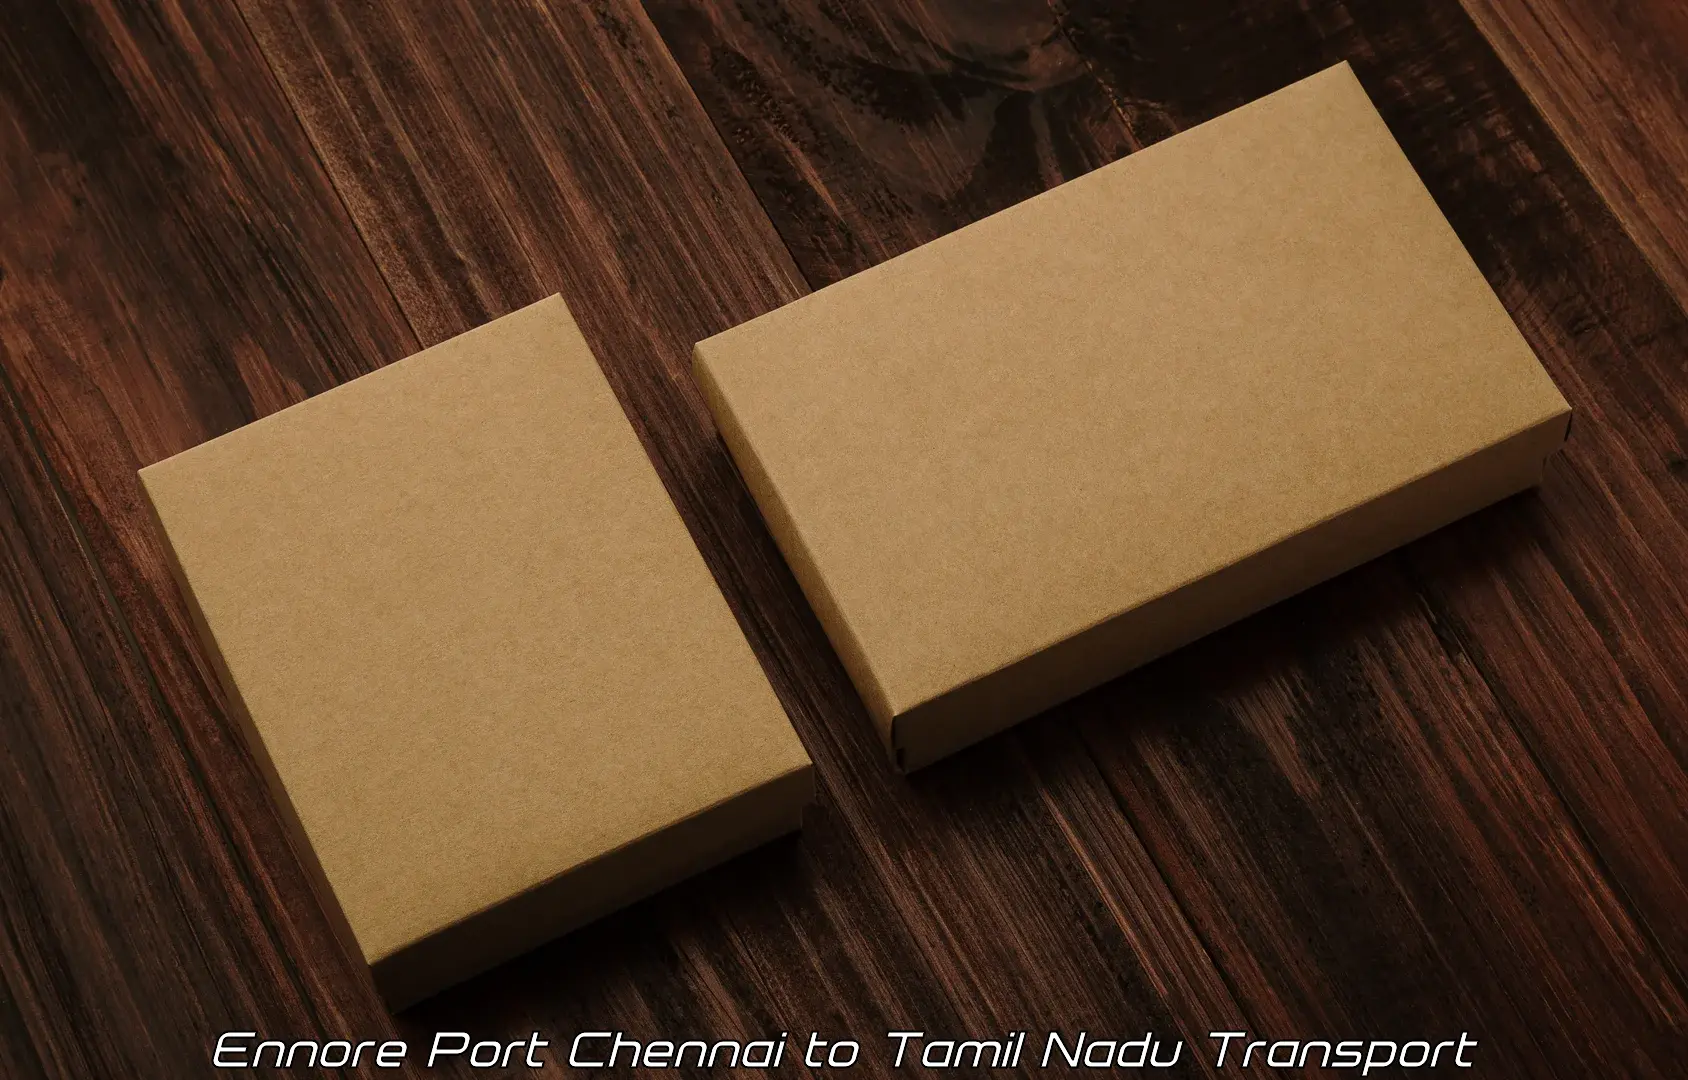 Luggage transport services Ennore Port Chennai to Pollachi